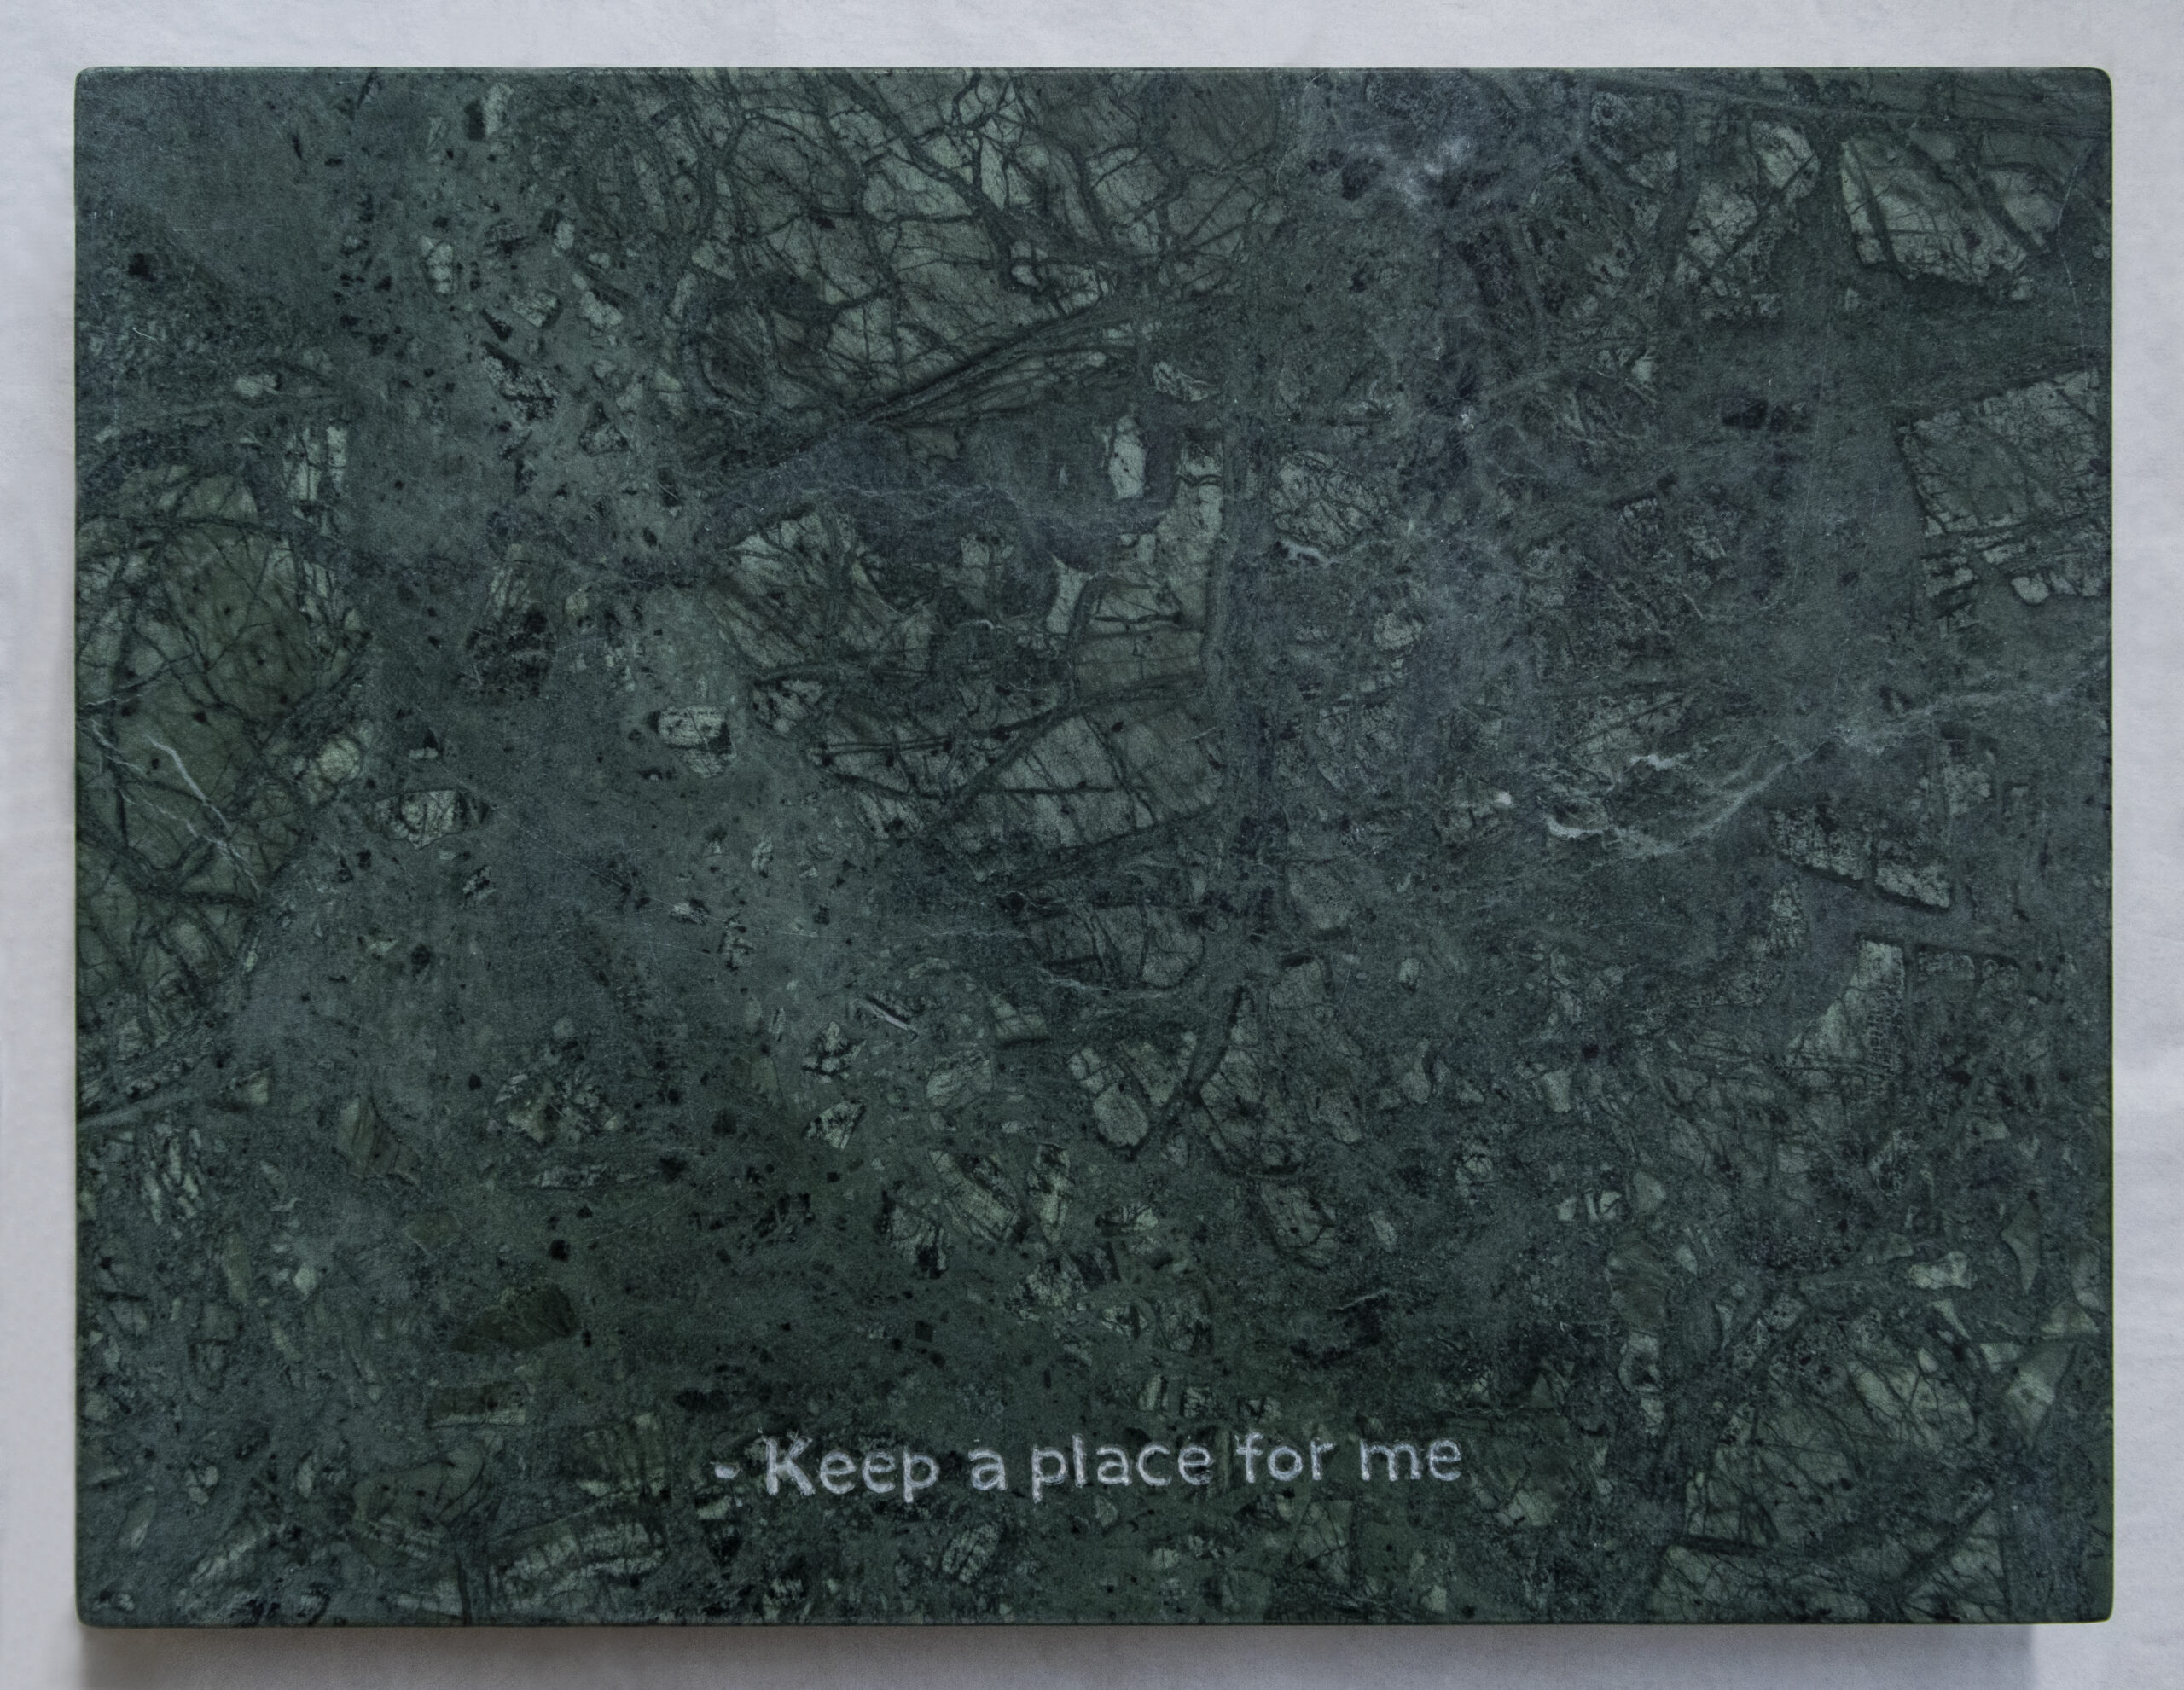 Guatemala green marble, 2020 - 38 x 29 cm - Marco Curiale - courtesy of the artist